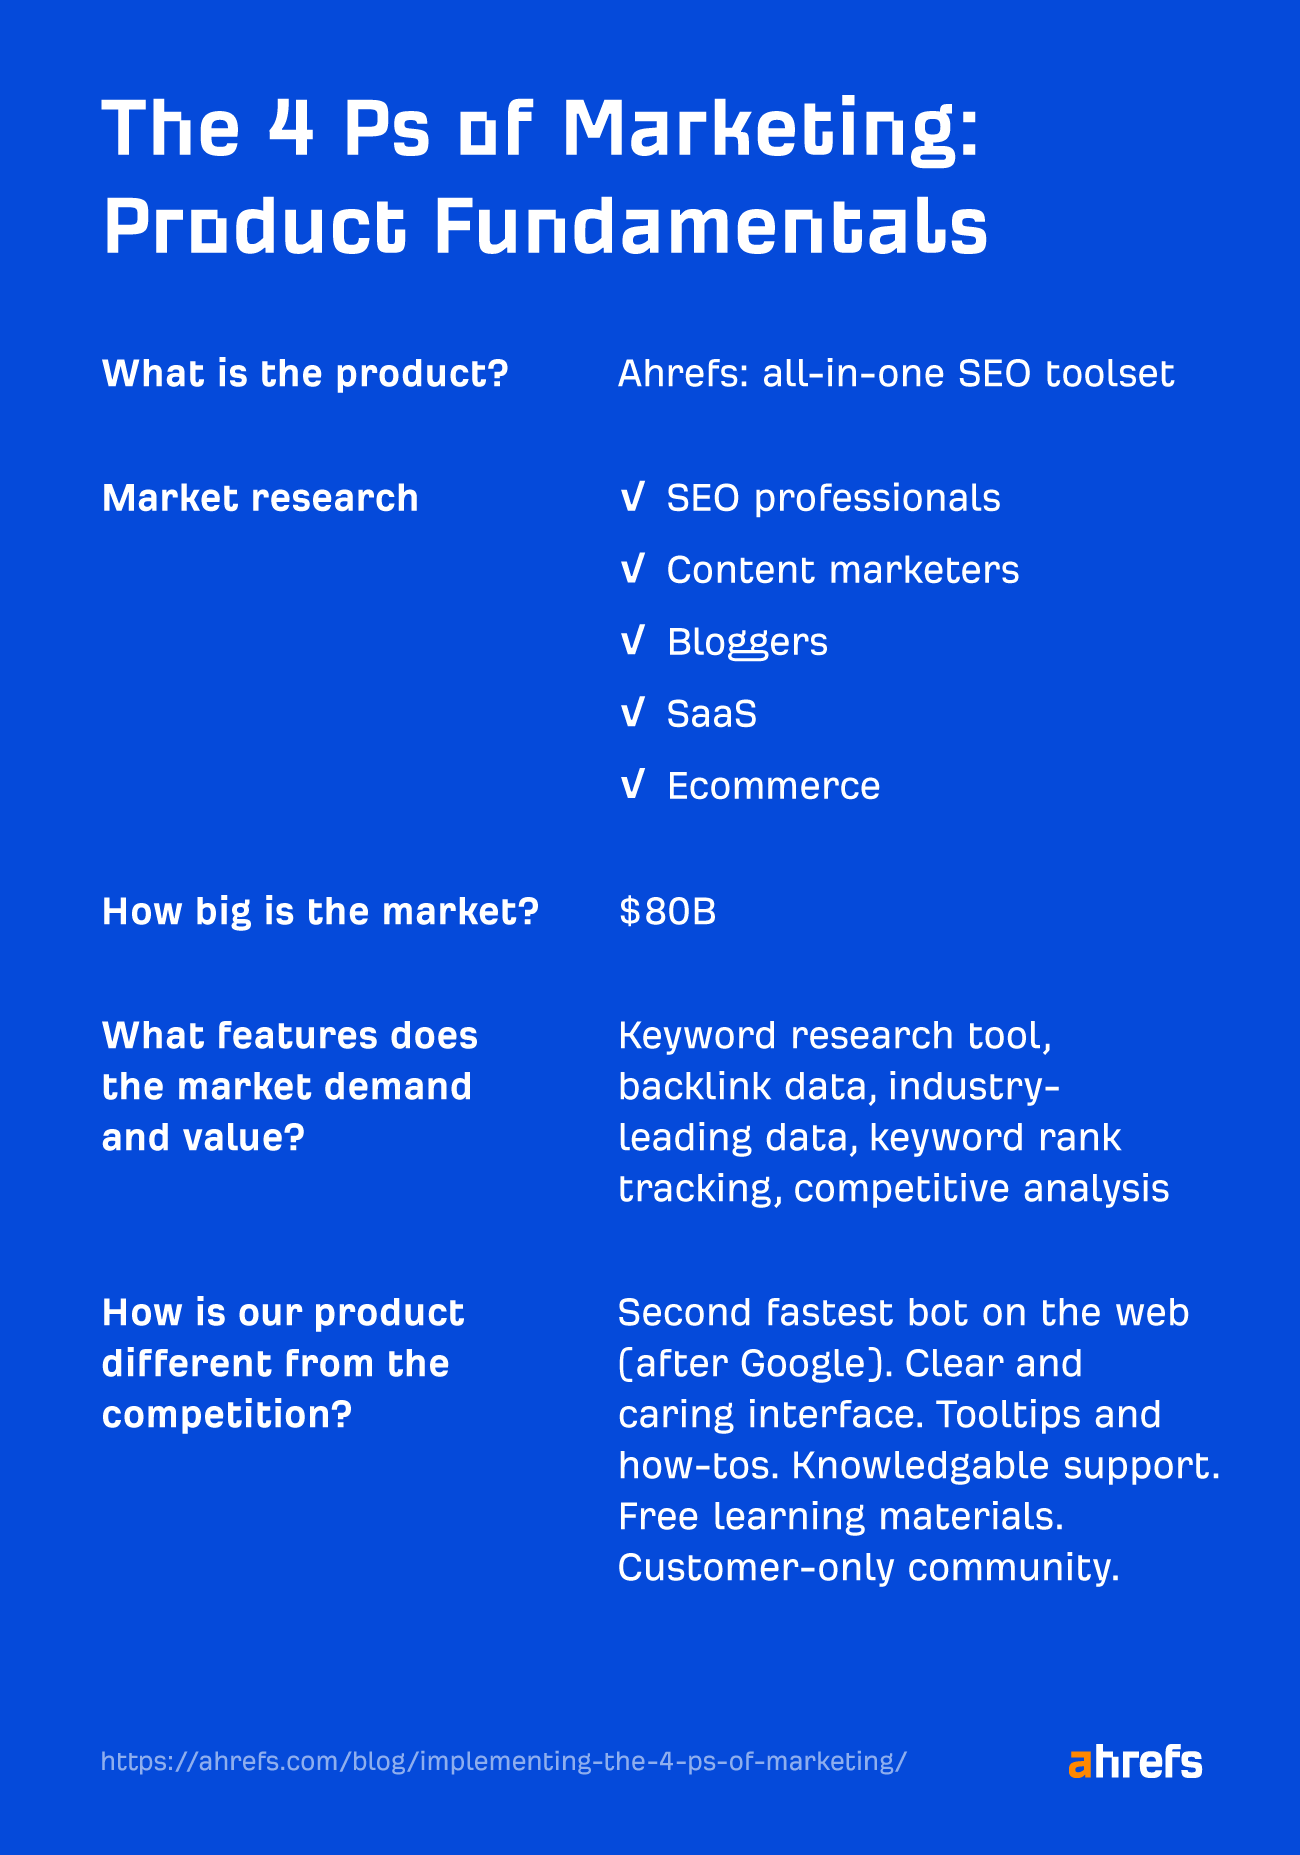 The 4Ps of Marketing: Product Fundamentals